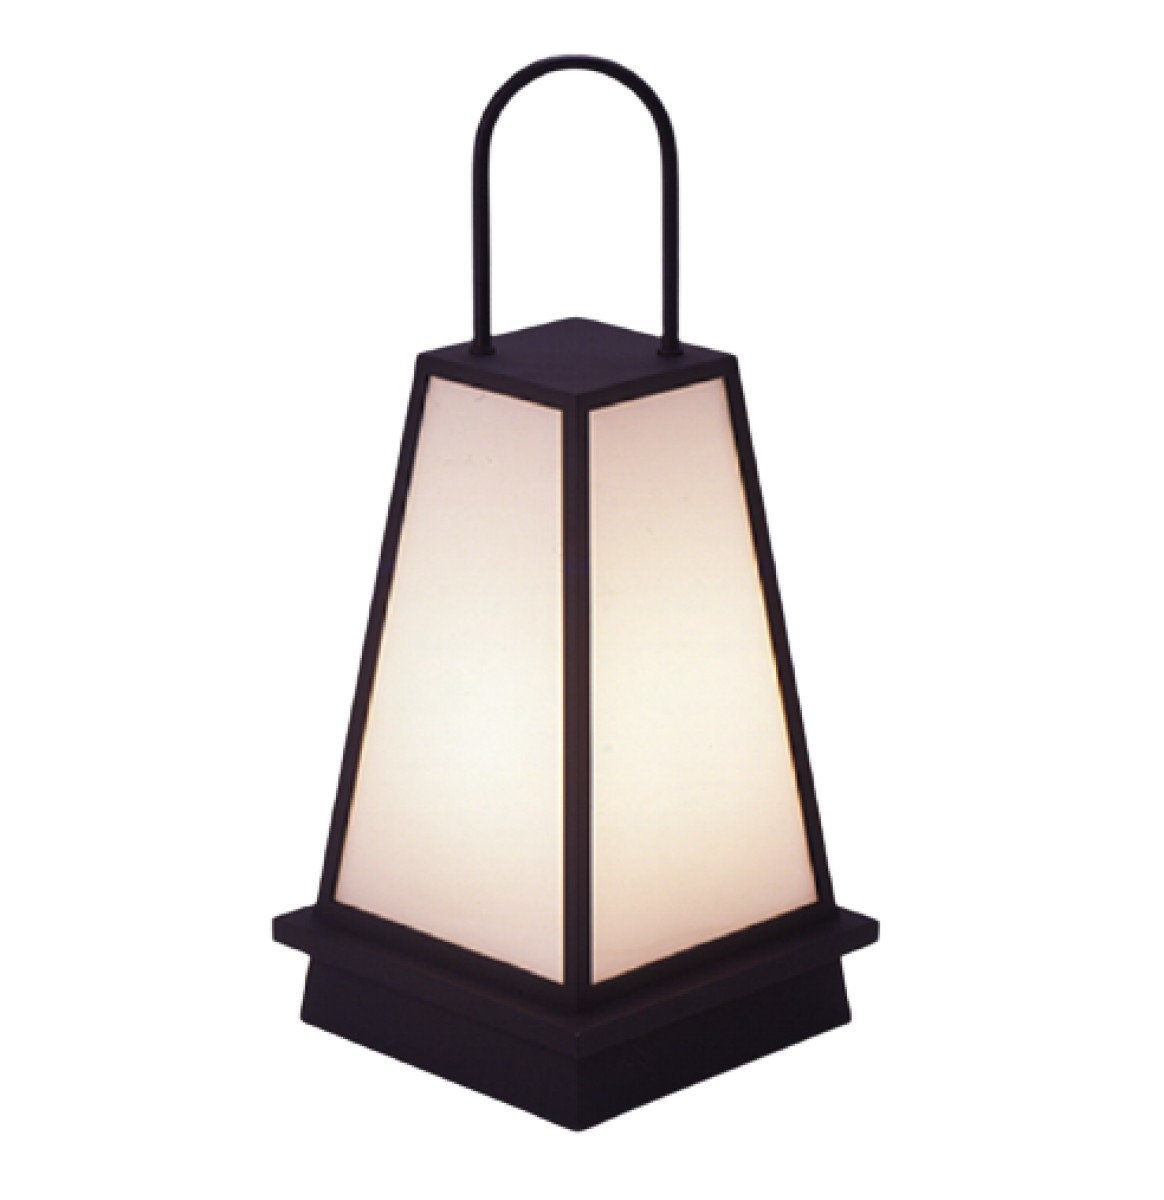 Alley Lamp without Mesh | Highlight image